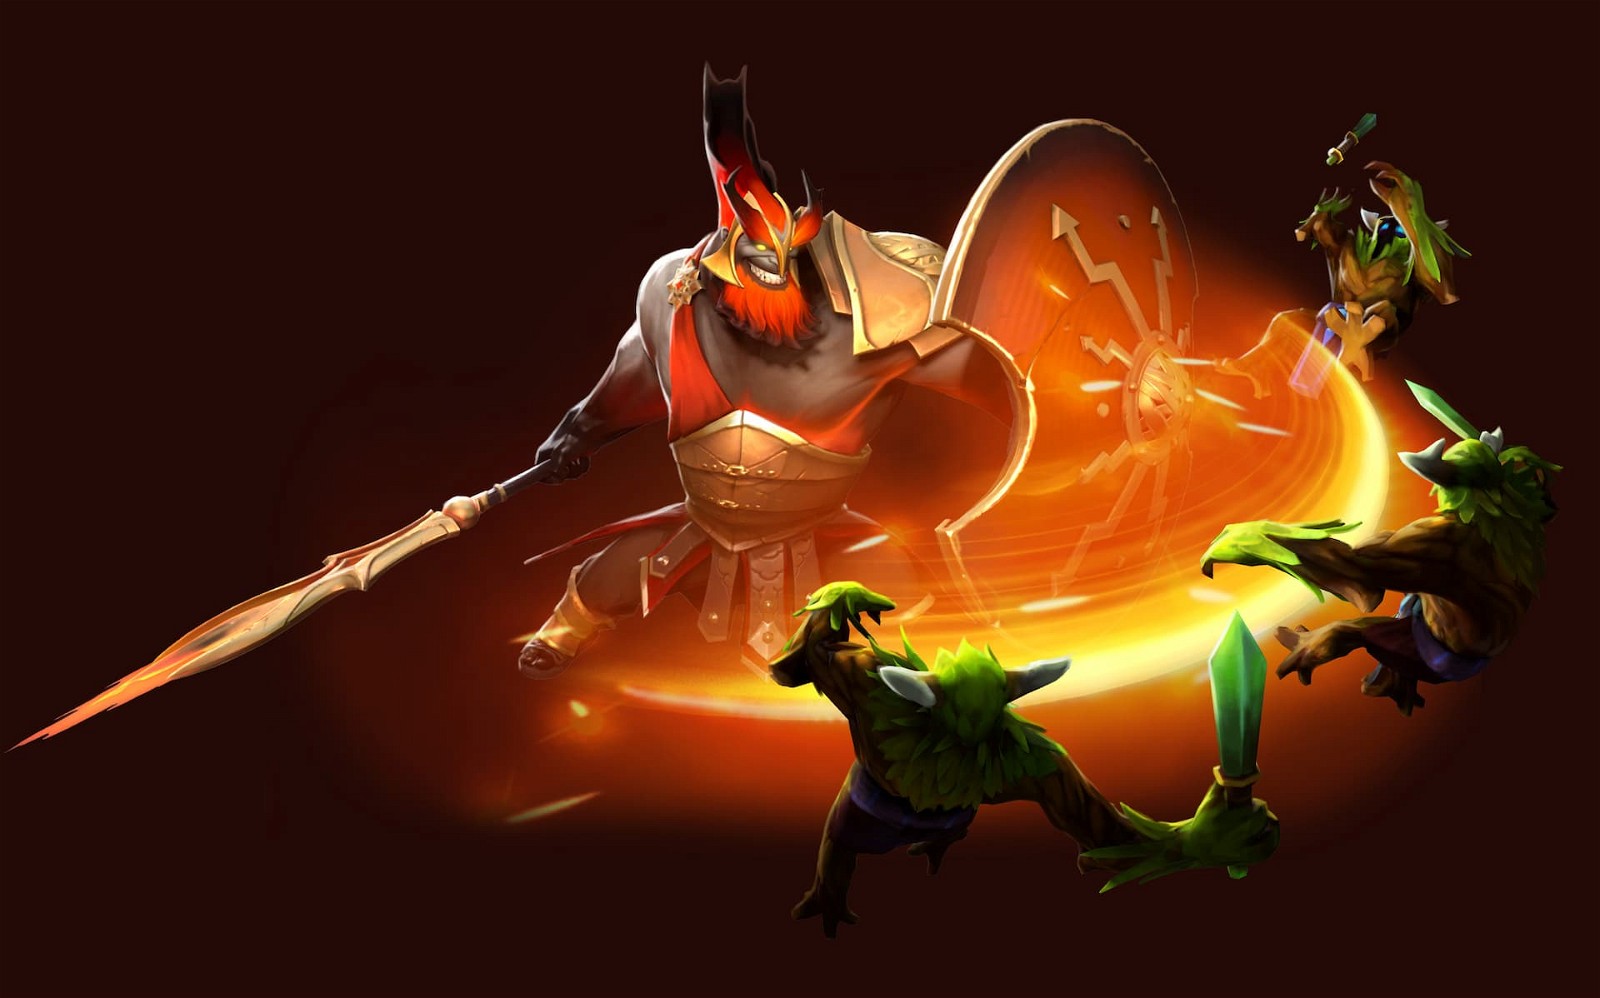 DOTA 2 players have also previously abused other bugs to gain unfair advantage